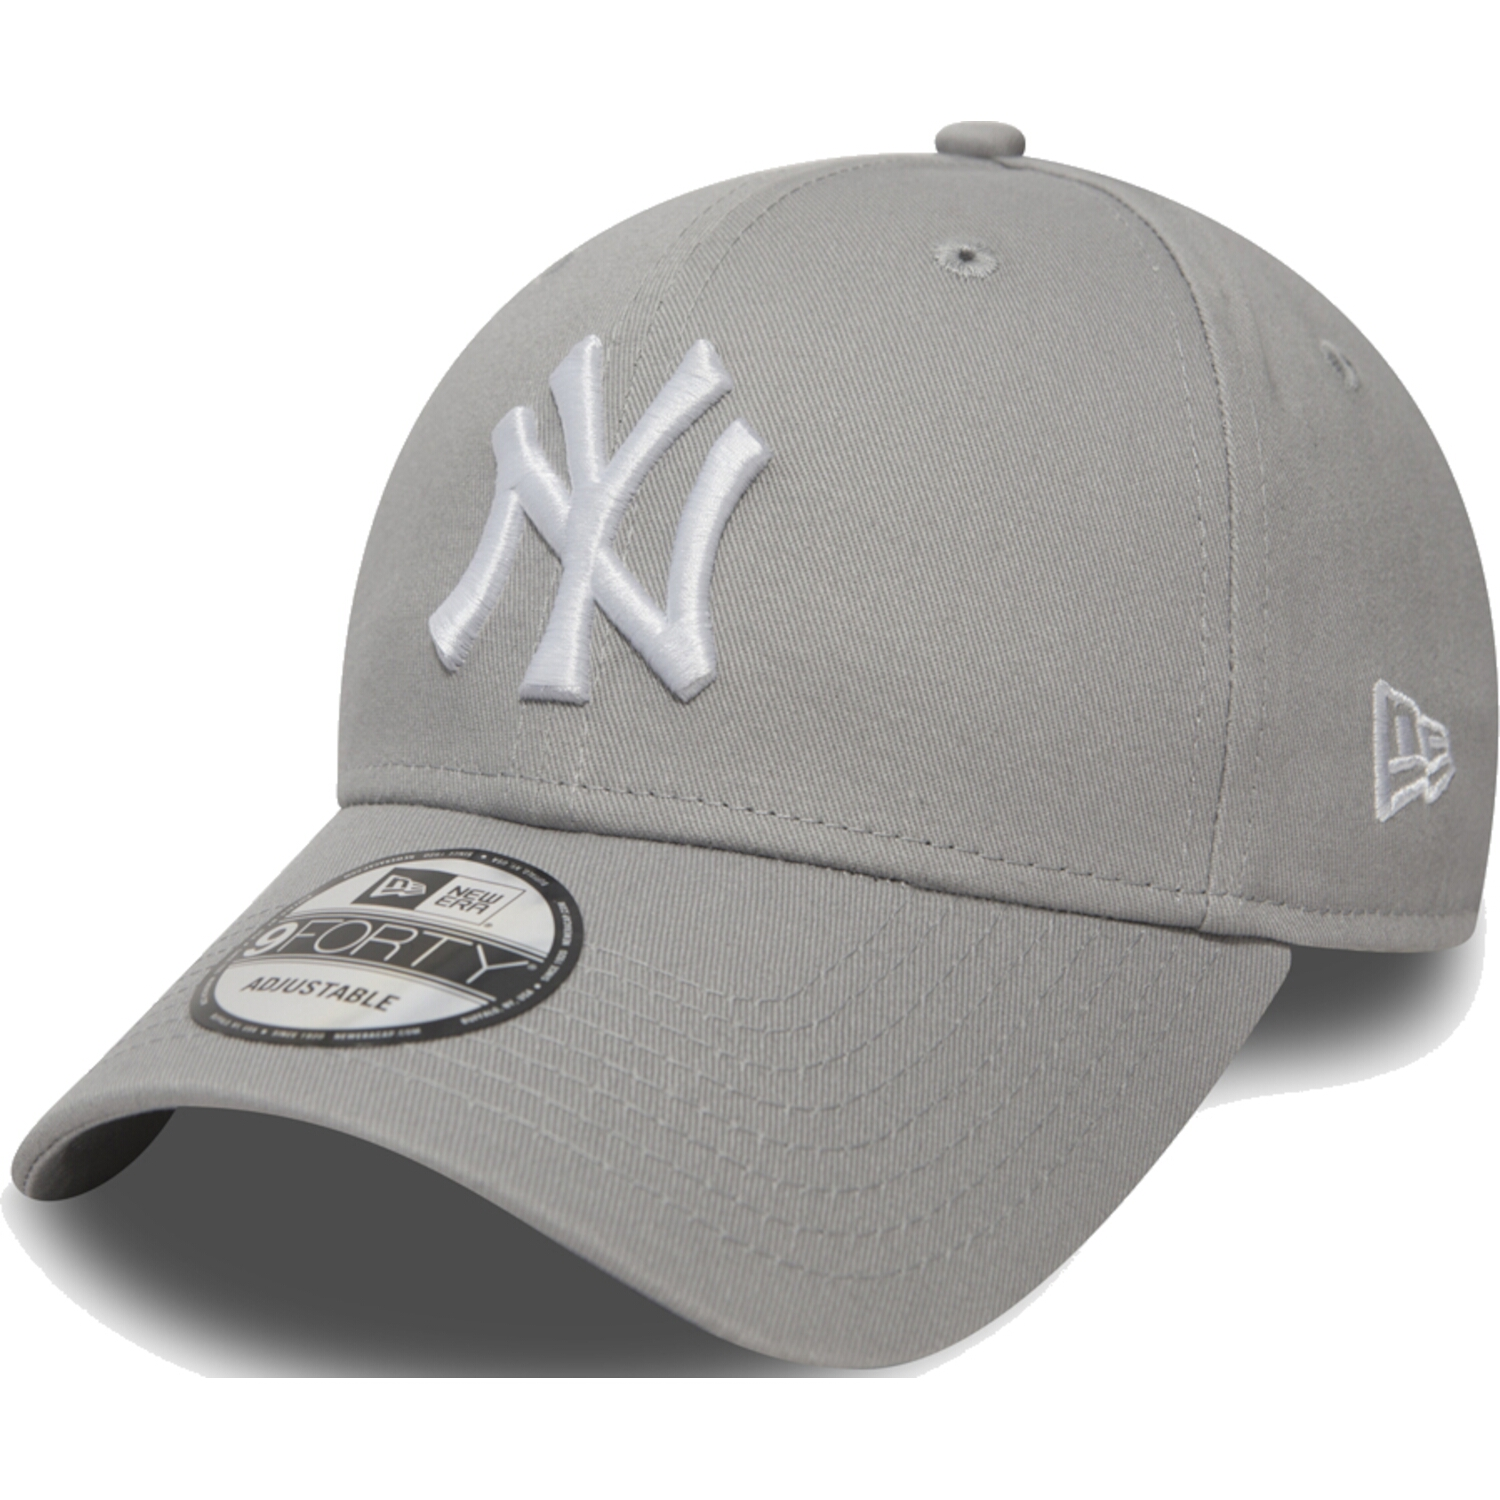 Het beste bout Madeliefje NEW ERA NEW YORK YANKEES 9FORTY LEAGUE CAP 10531940 - wbsport.nl